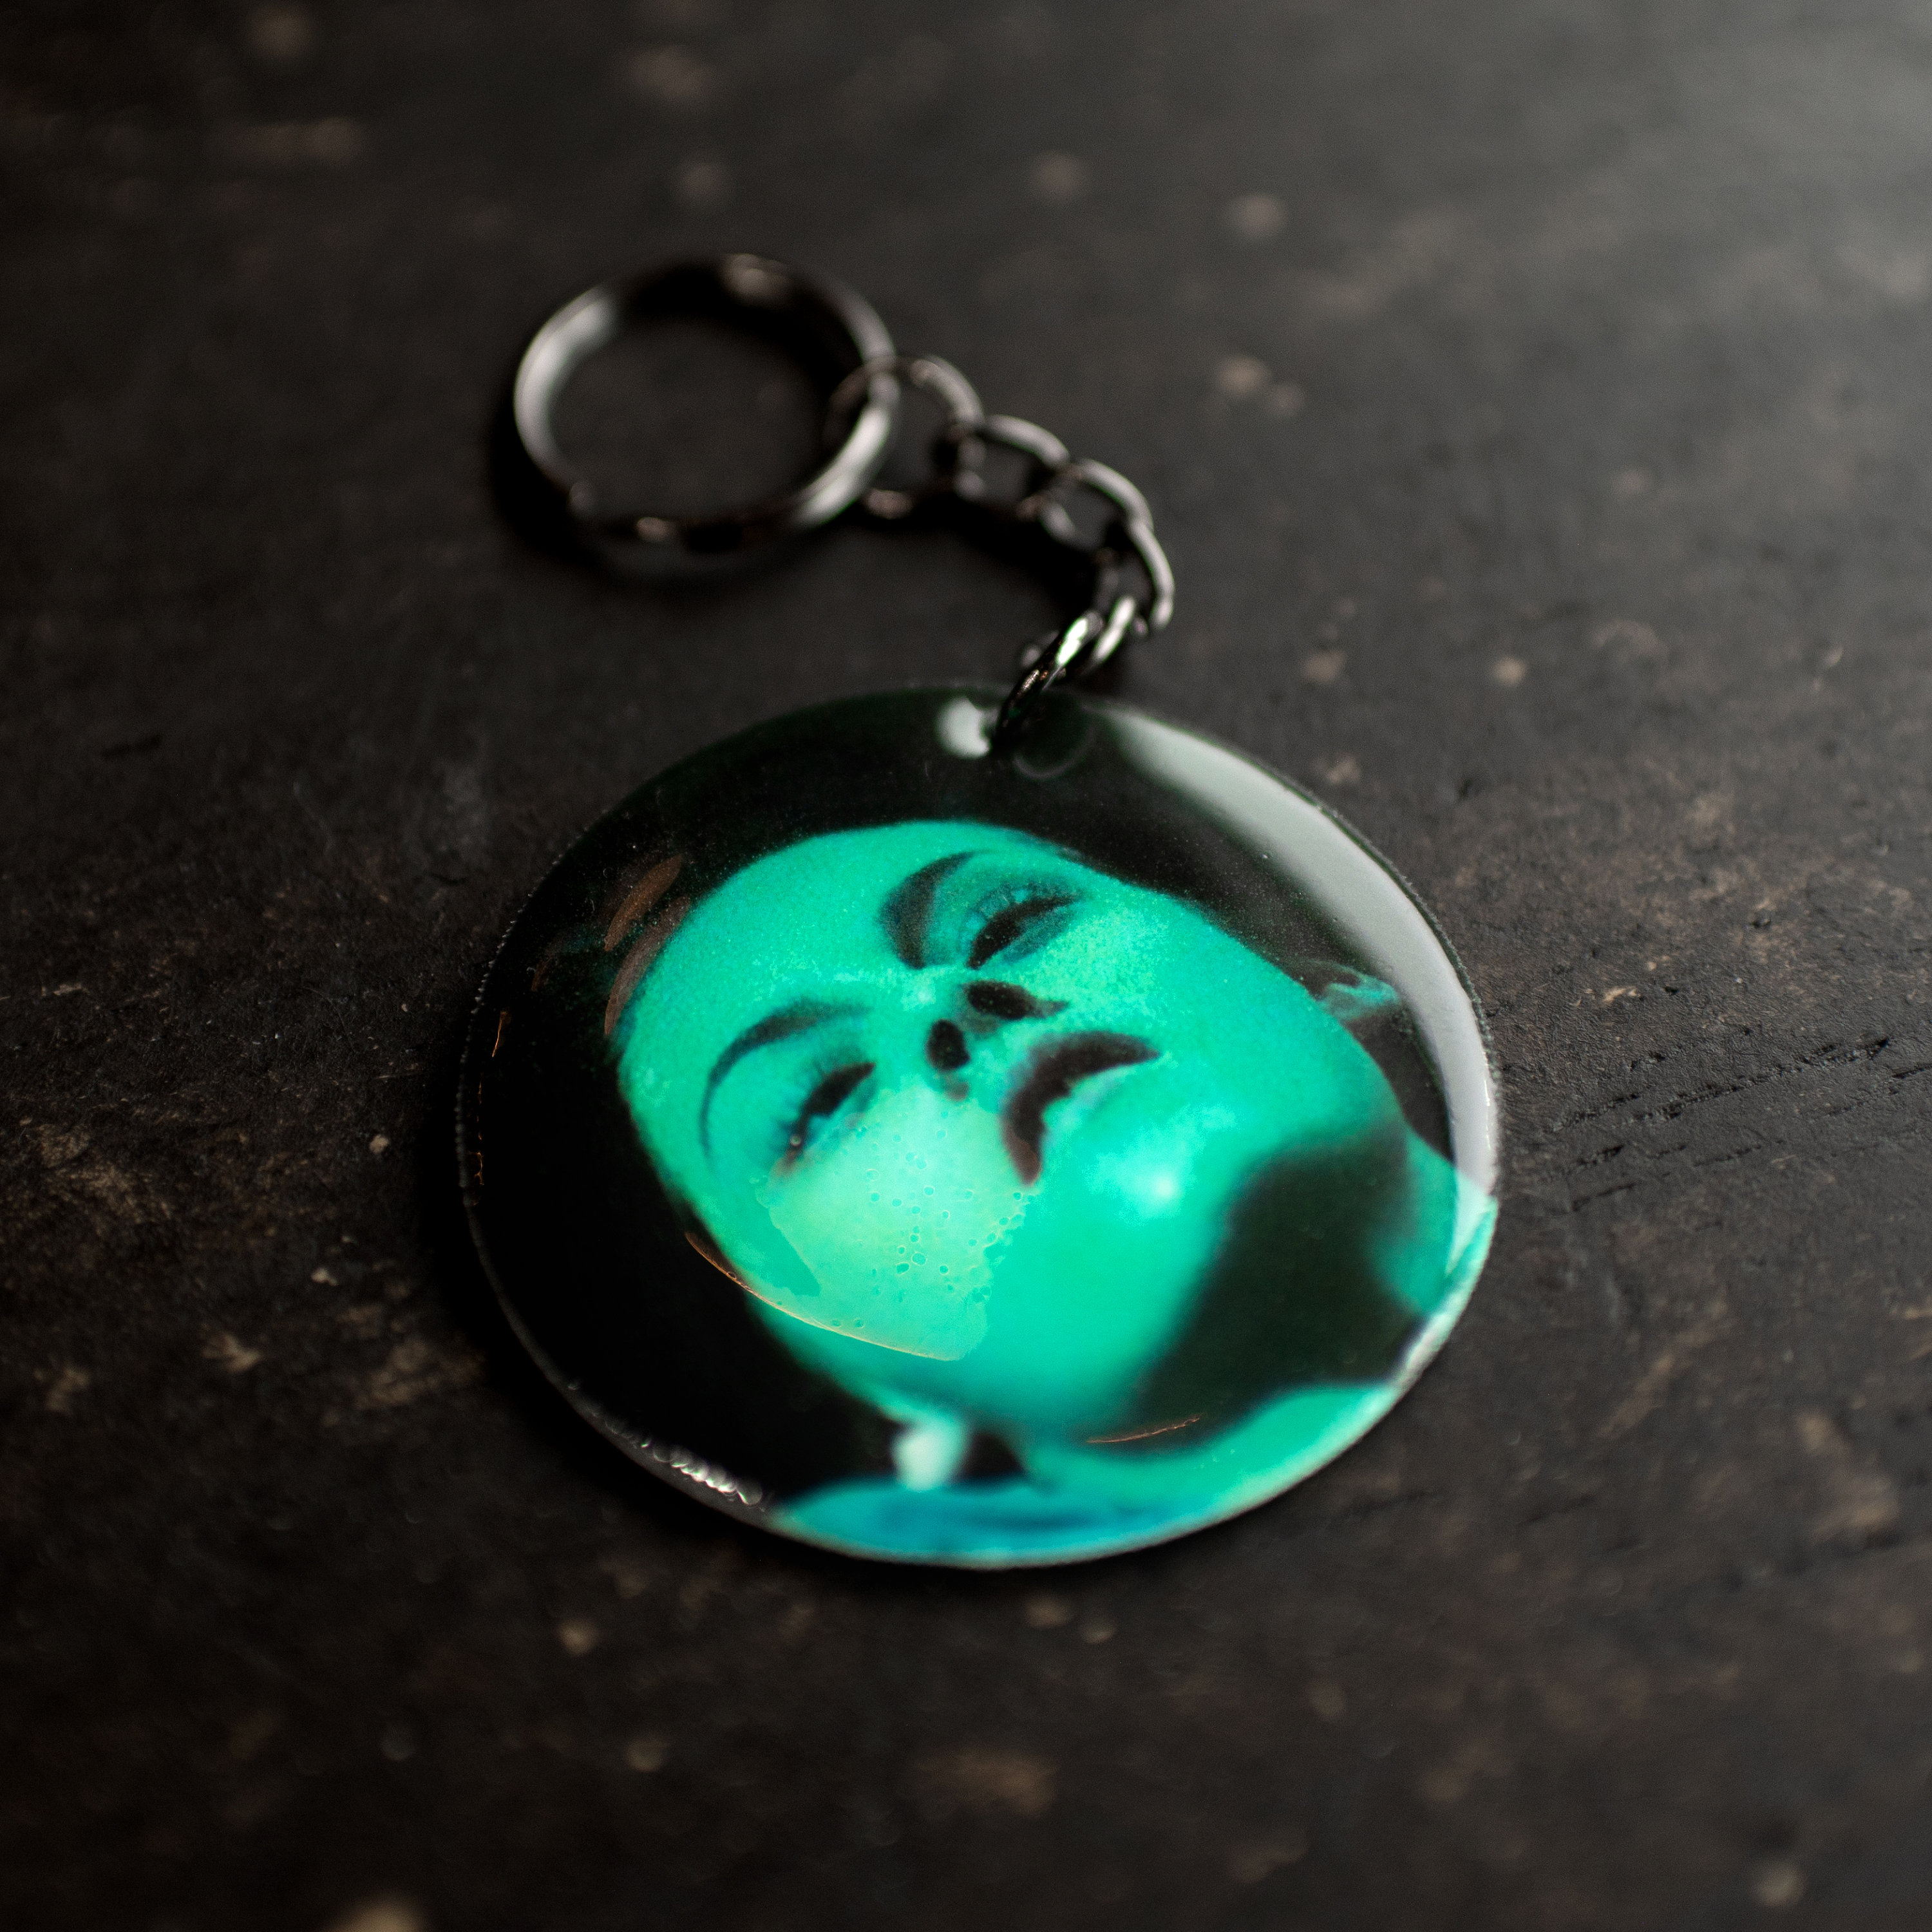 Twilight - Lucite Keychain B The Cullens